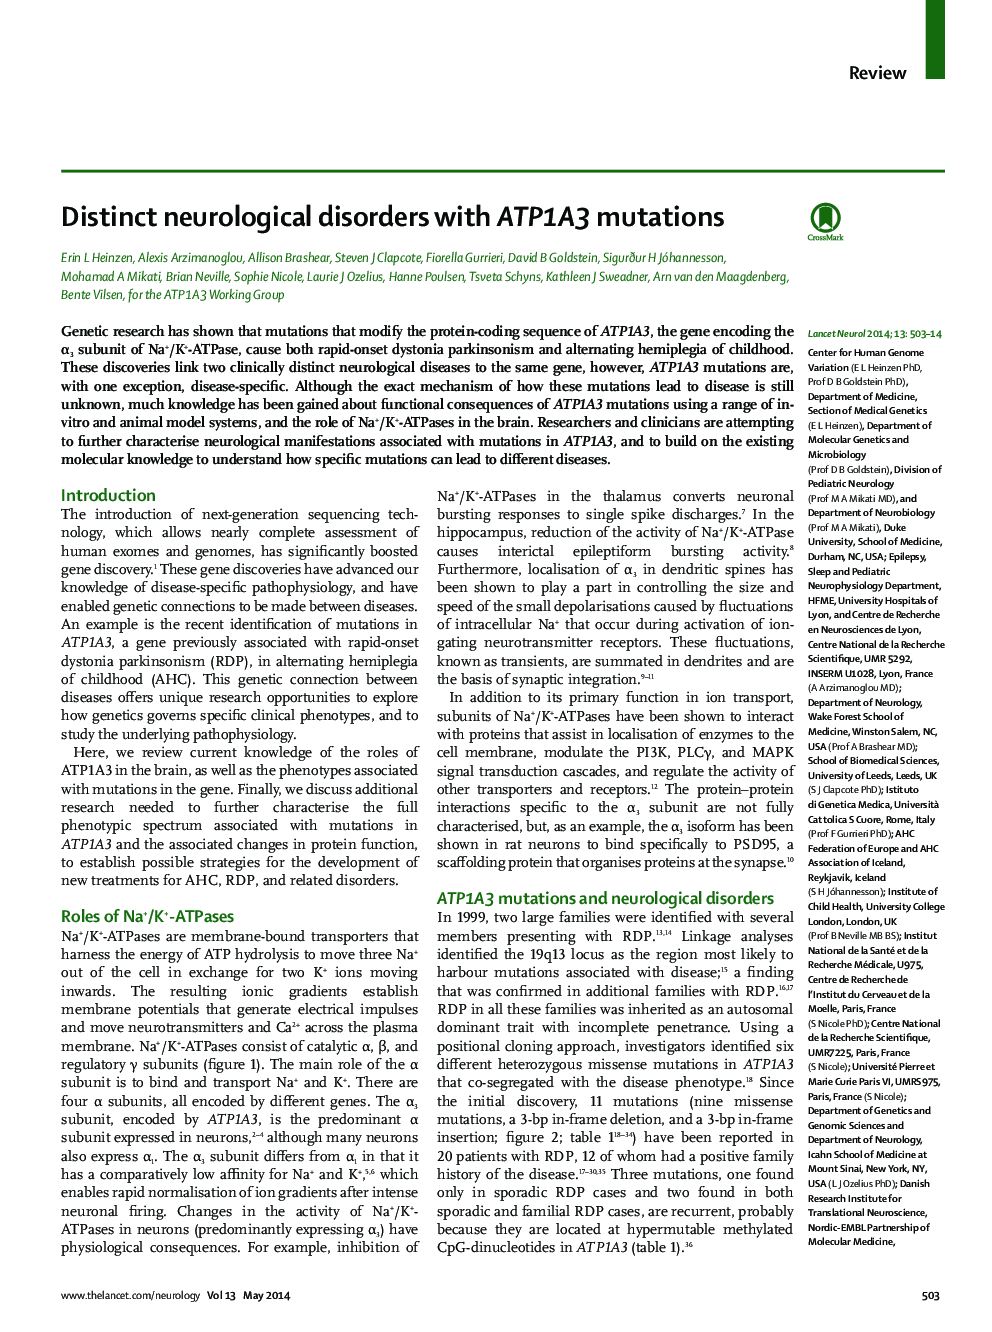 Distinct neurological disorders with ATP1A3 mutations